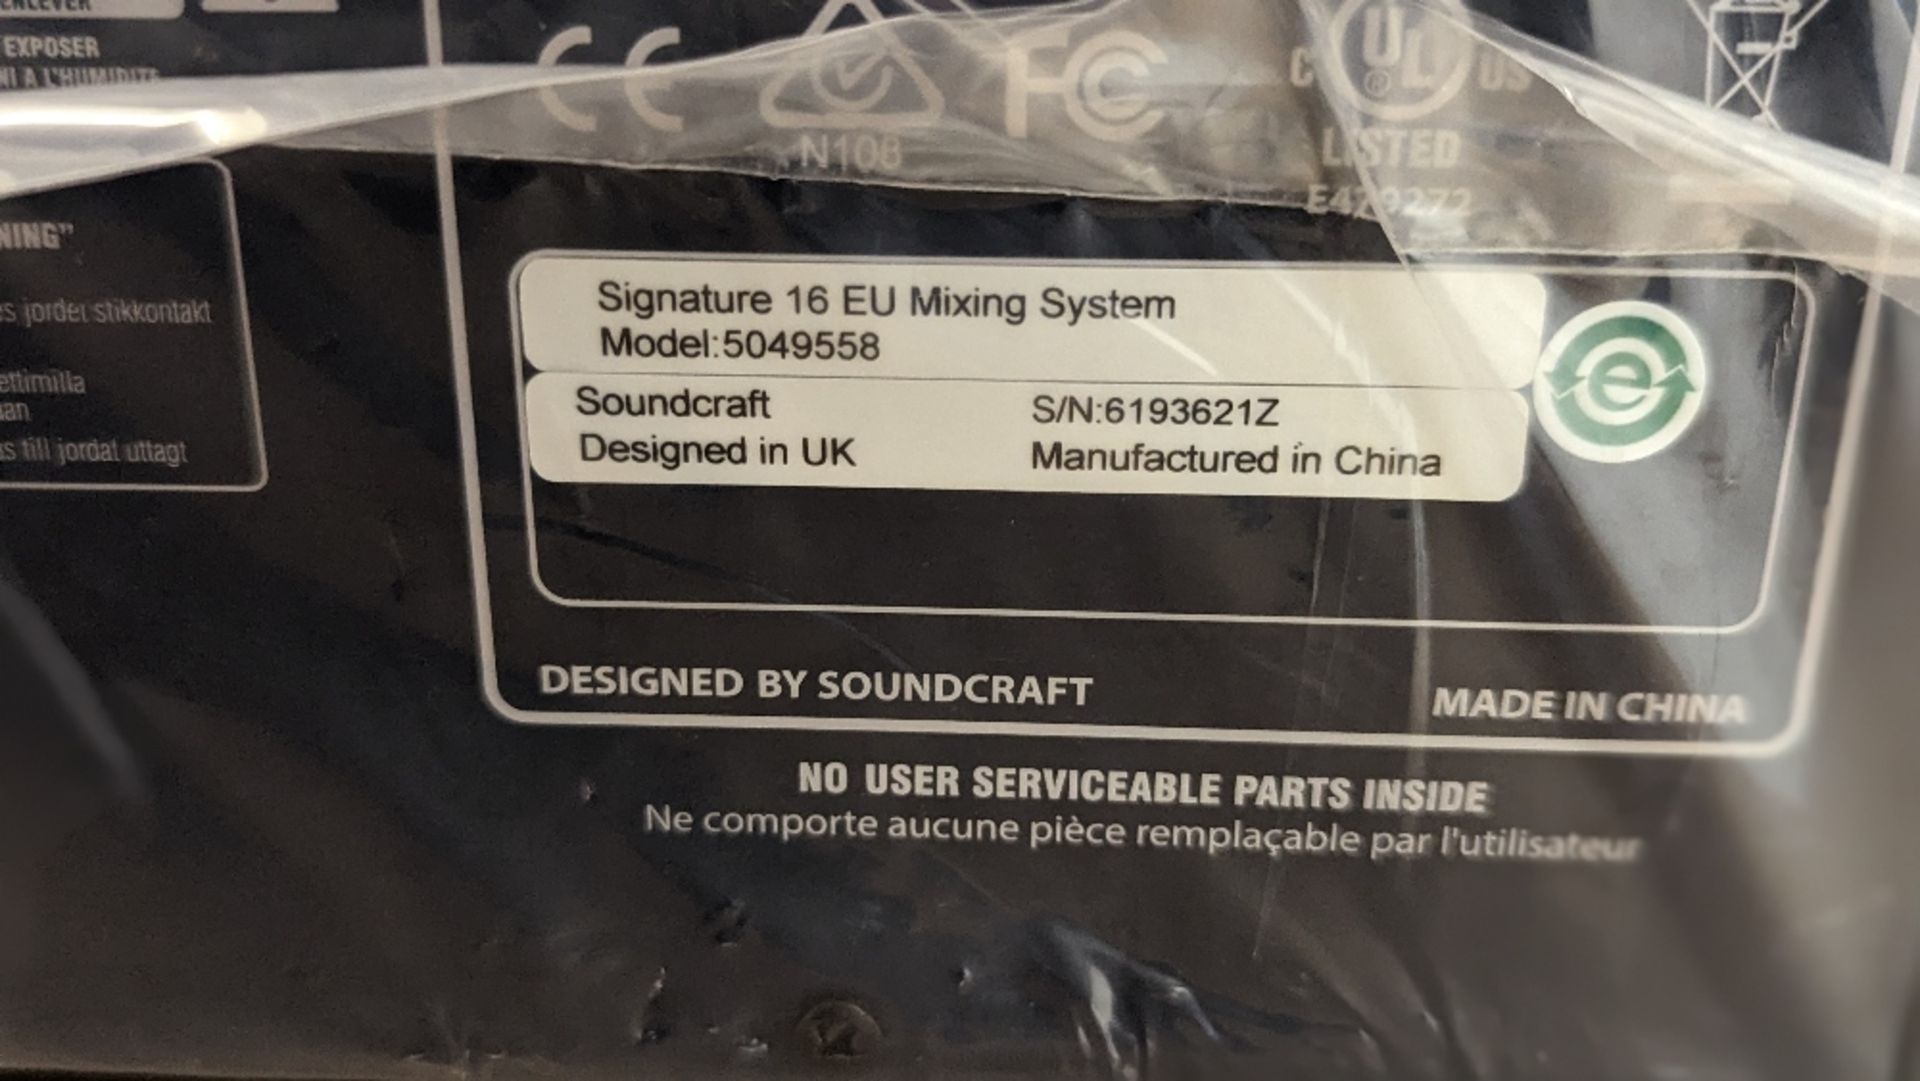 Soundcraft Signature 16 Analogue Mixing Desk Console (Brand new with original box and packaging) - Image 3 of 4